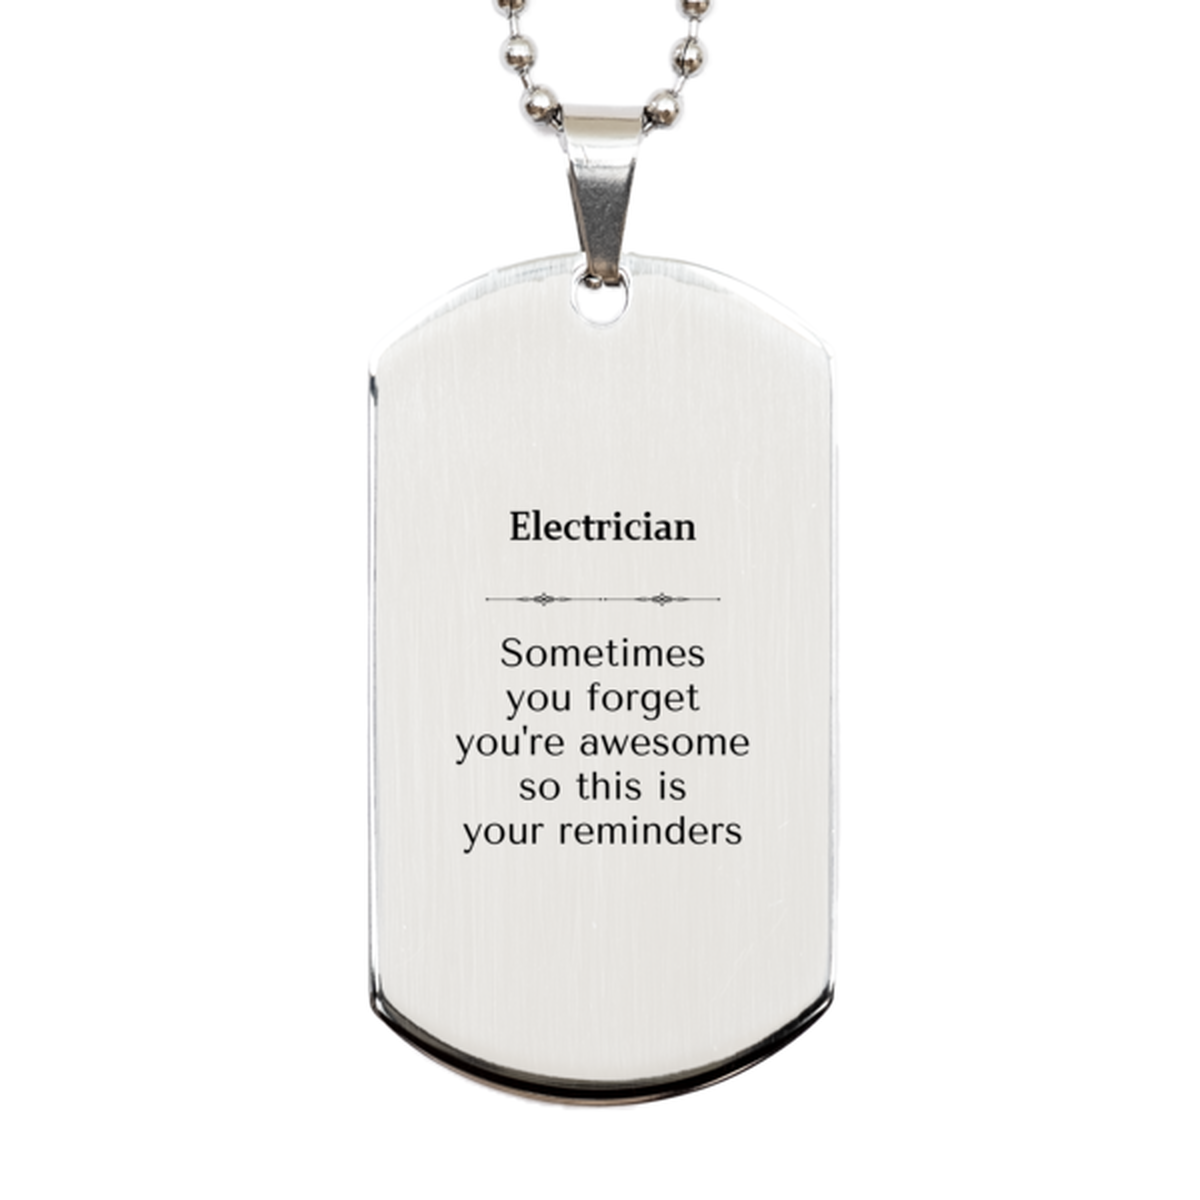 Sentimental Electrician Silver Dog Tag, Electrician Sometimes you forget you're awesome so this is your reminders, Graduation Christmas Birthday Gifts for Electrician, Men, Women, Coworkers